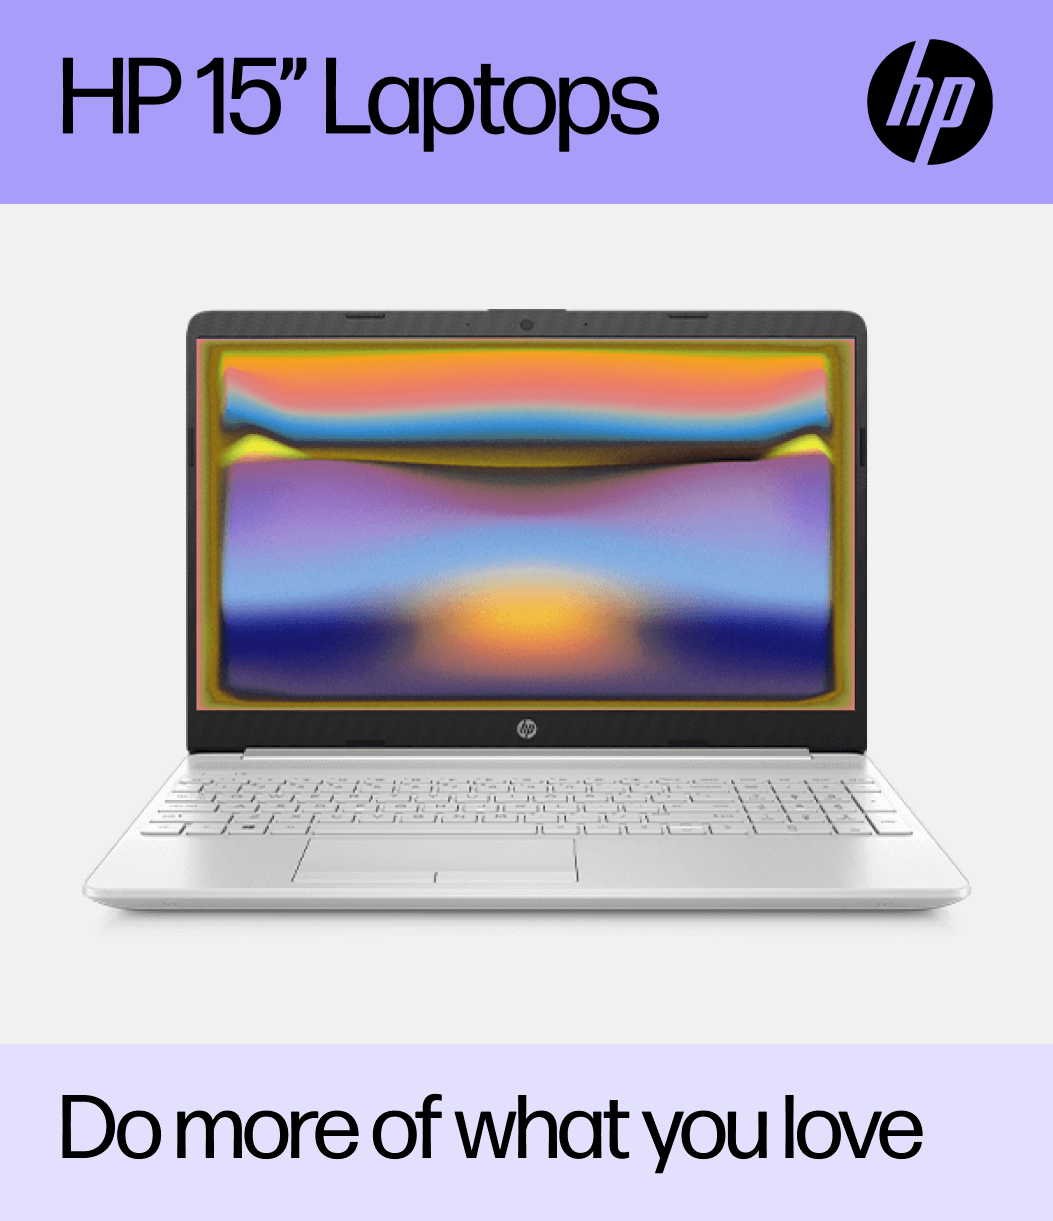 HP 15 inch laptops - Do more of what you love